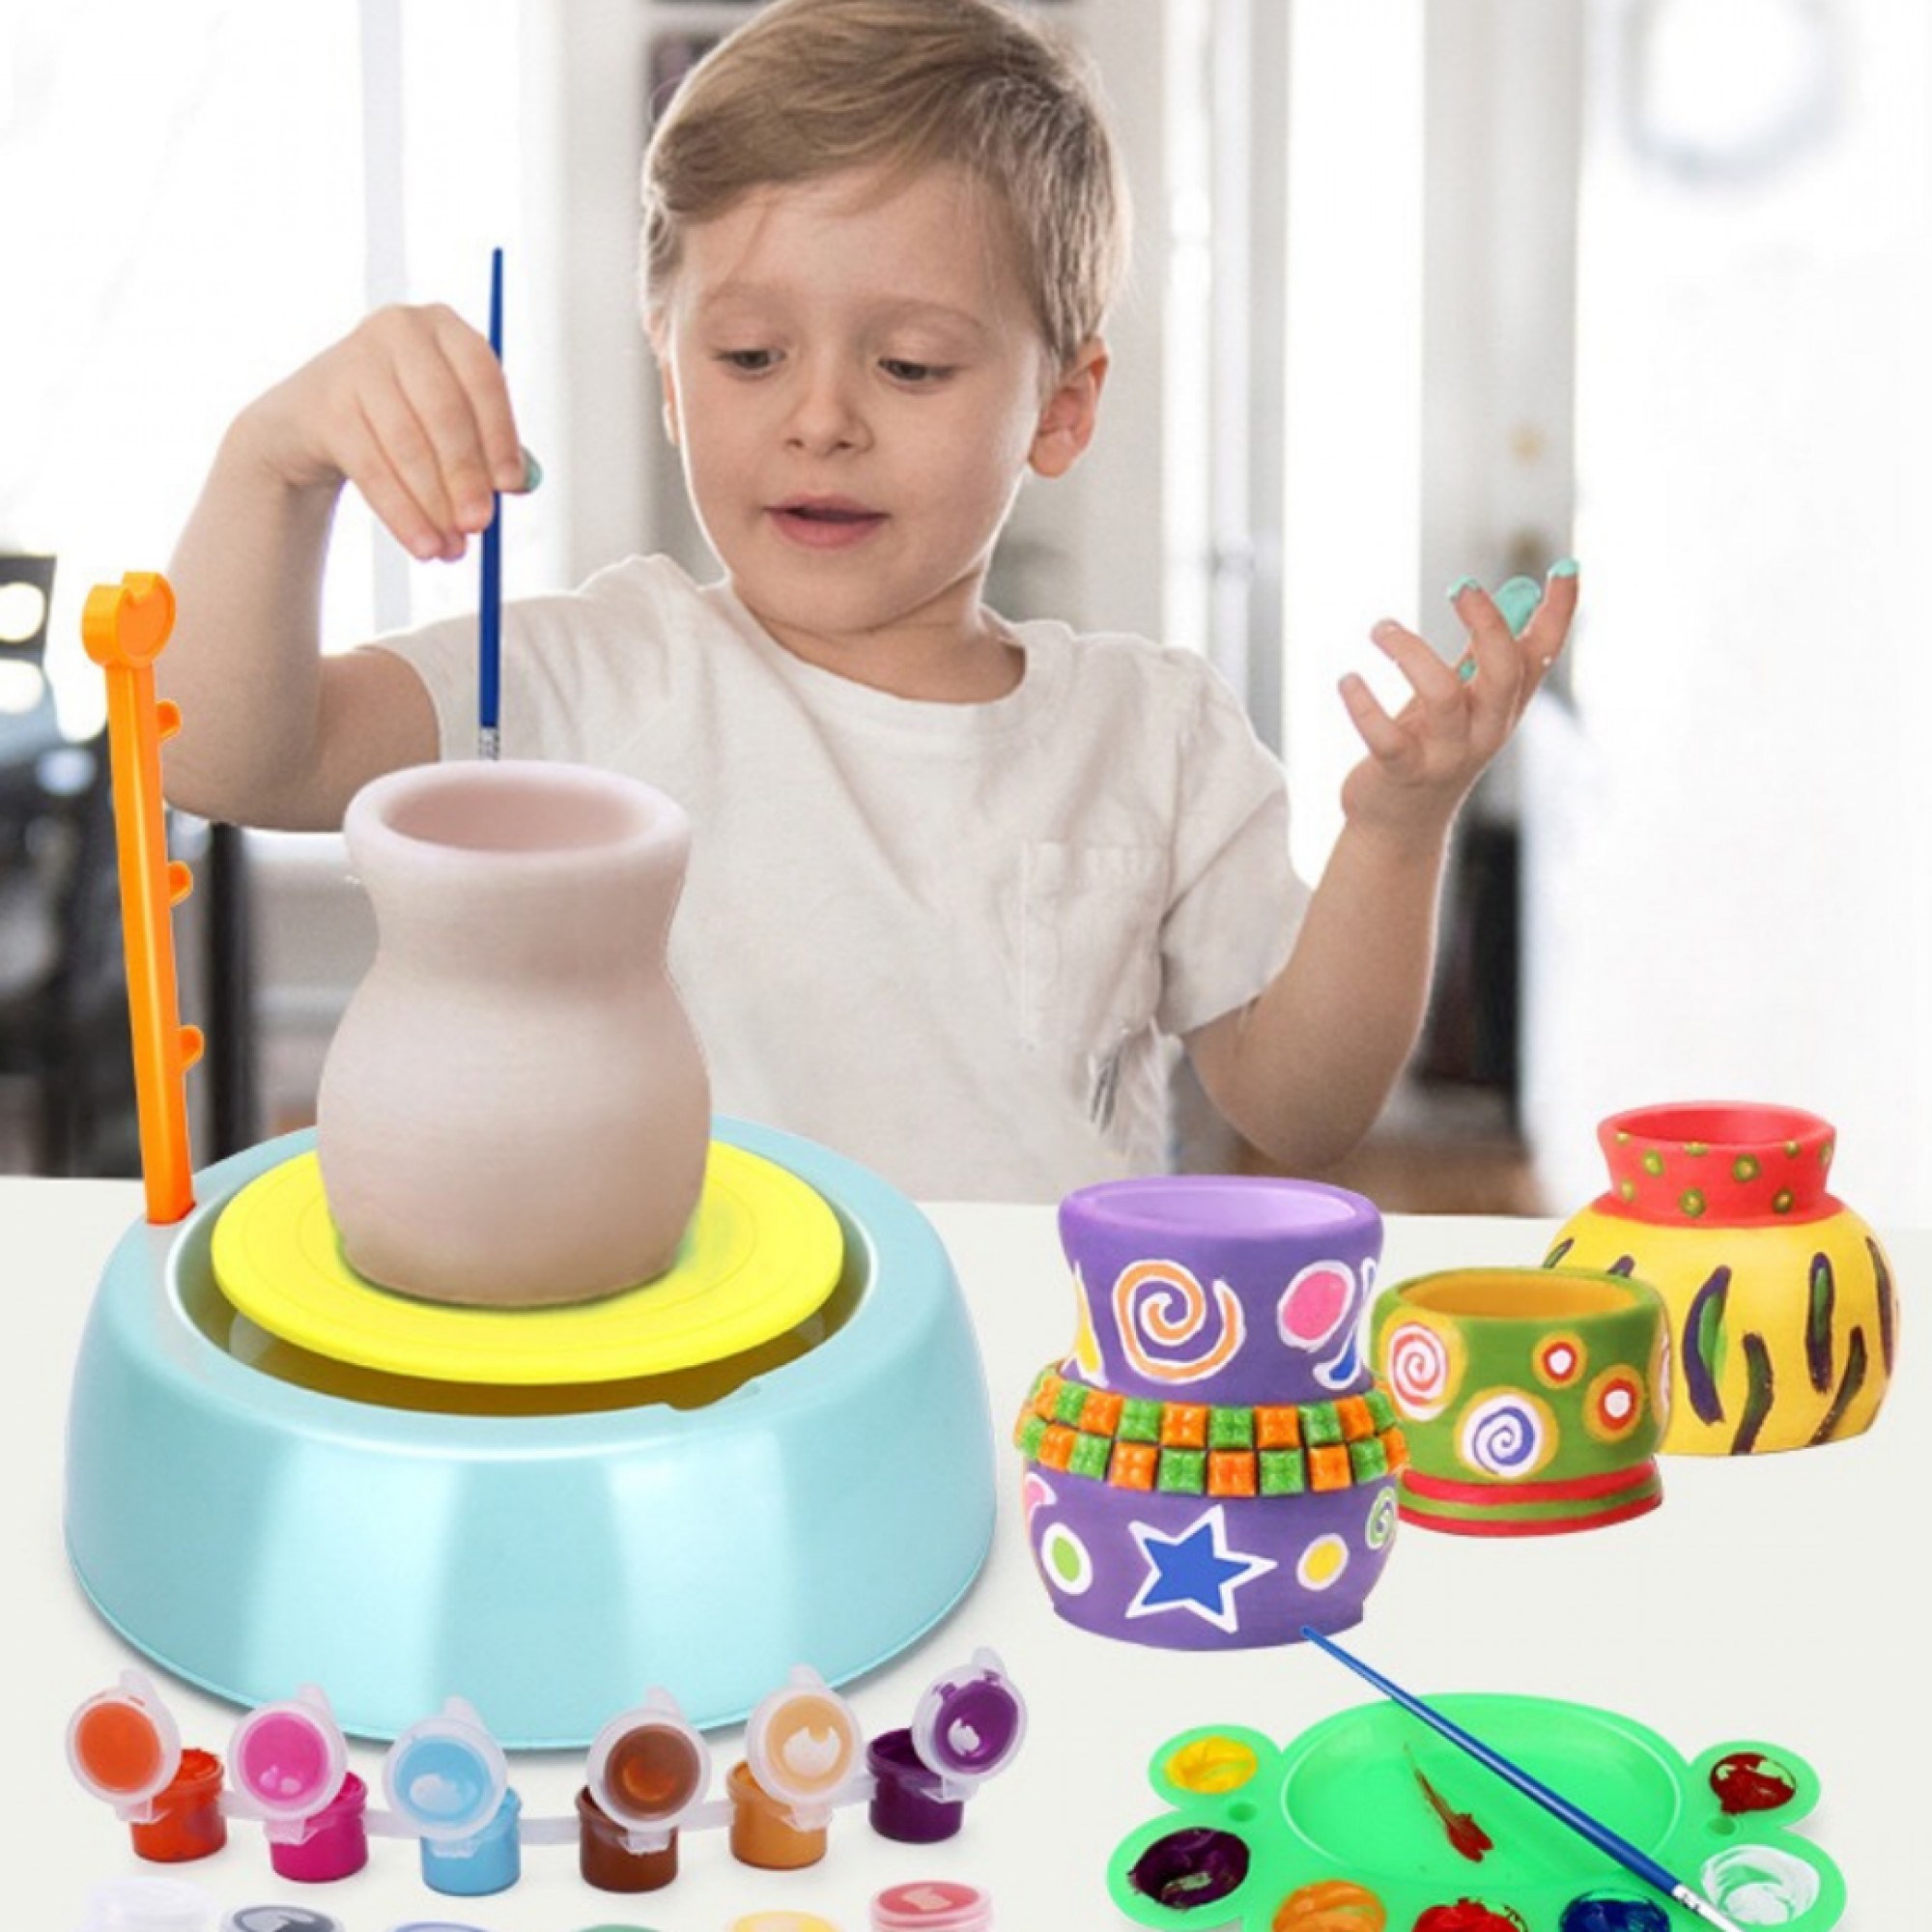 BEGINNERS POTTERY WHEEL KIT FOR KIDS WITH CLAY PAINTS AND TOOLS